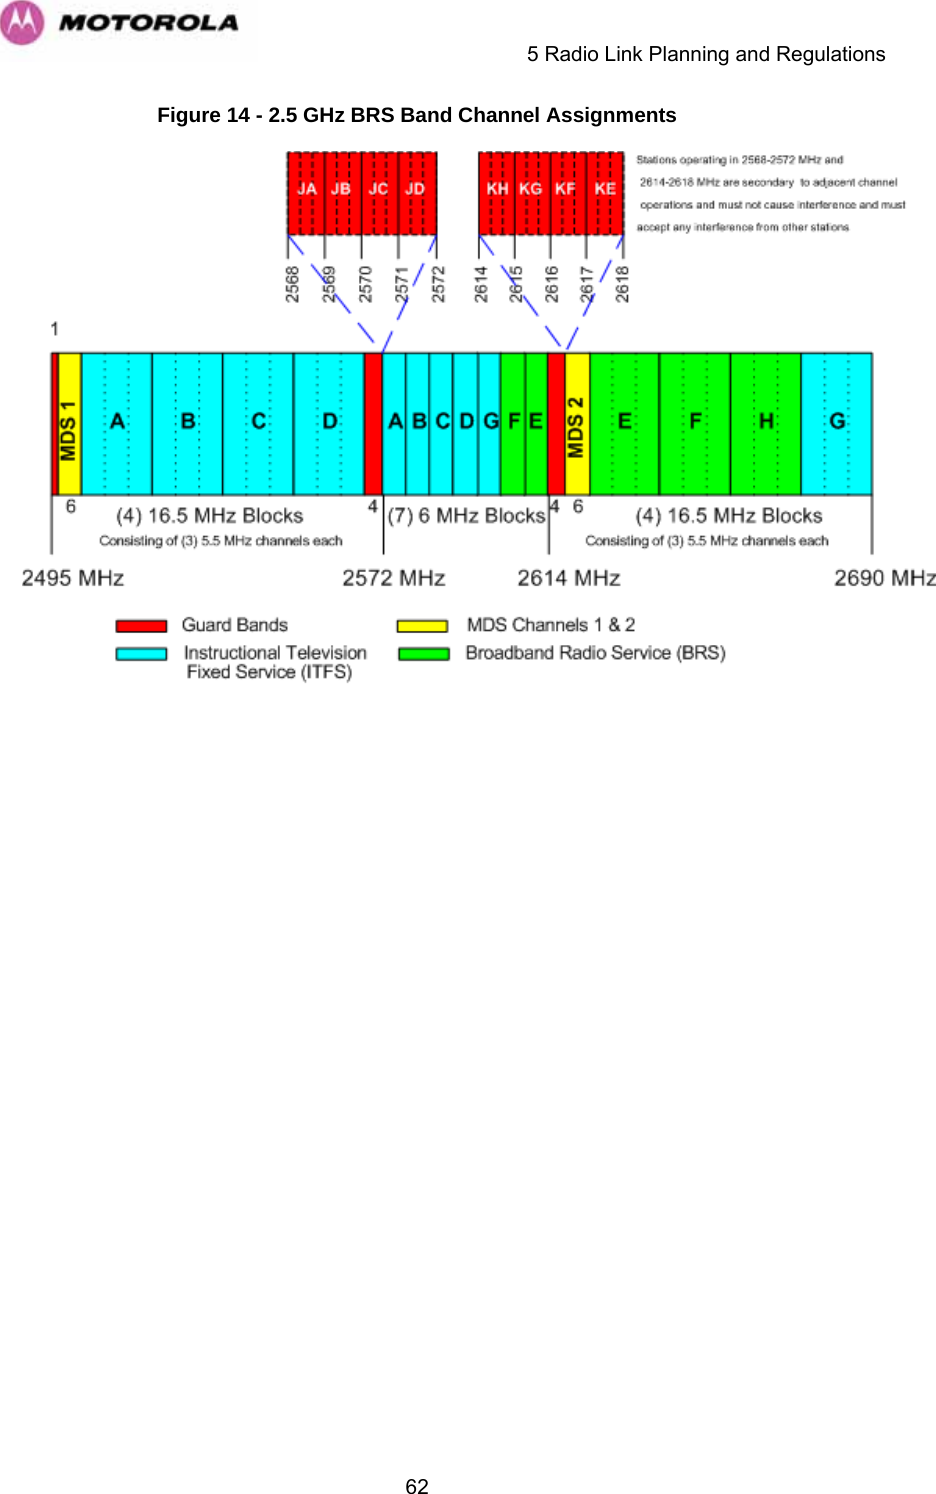     5 Radio Link Planning and Regulations  62Figure 14 - 2.5 GHz BRS Band Channel Assignments      